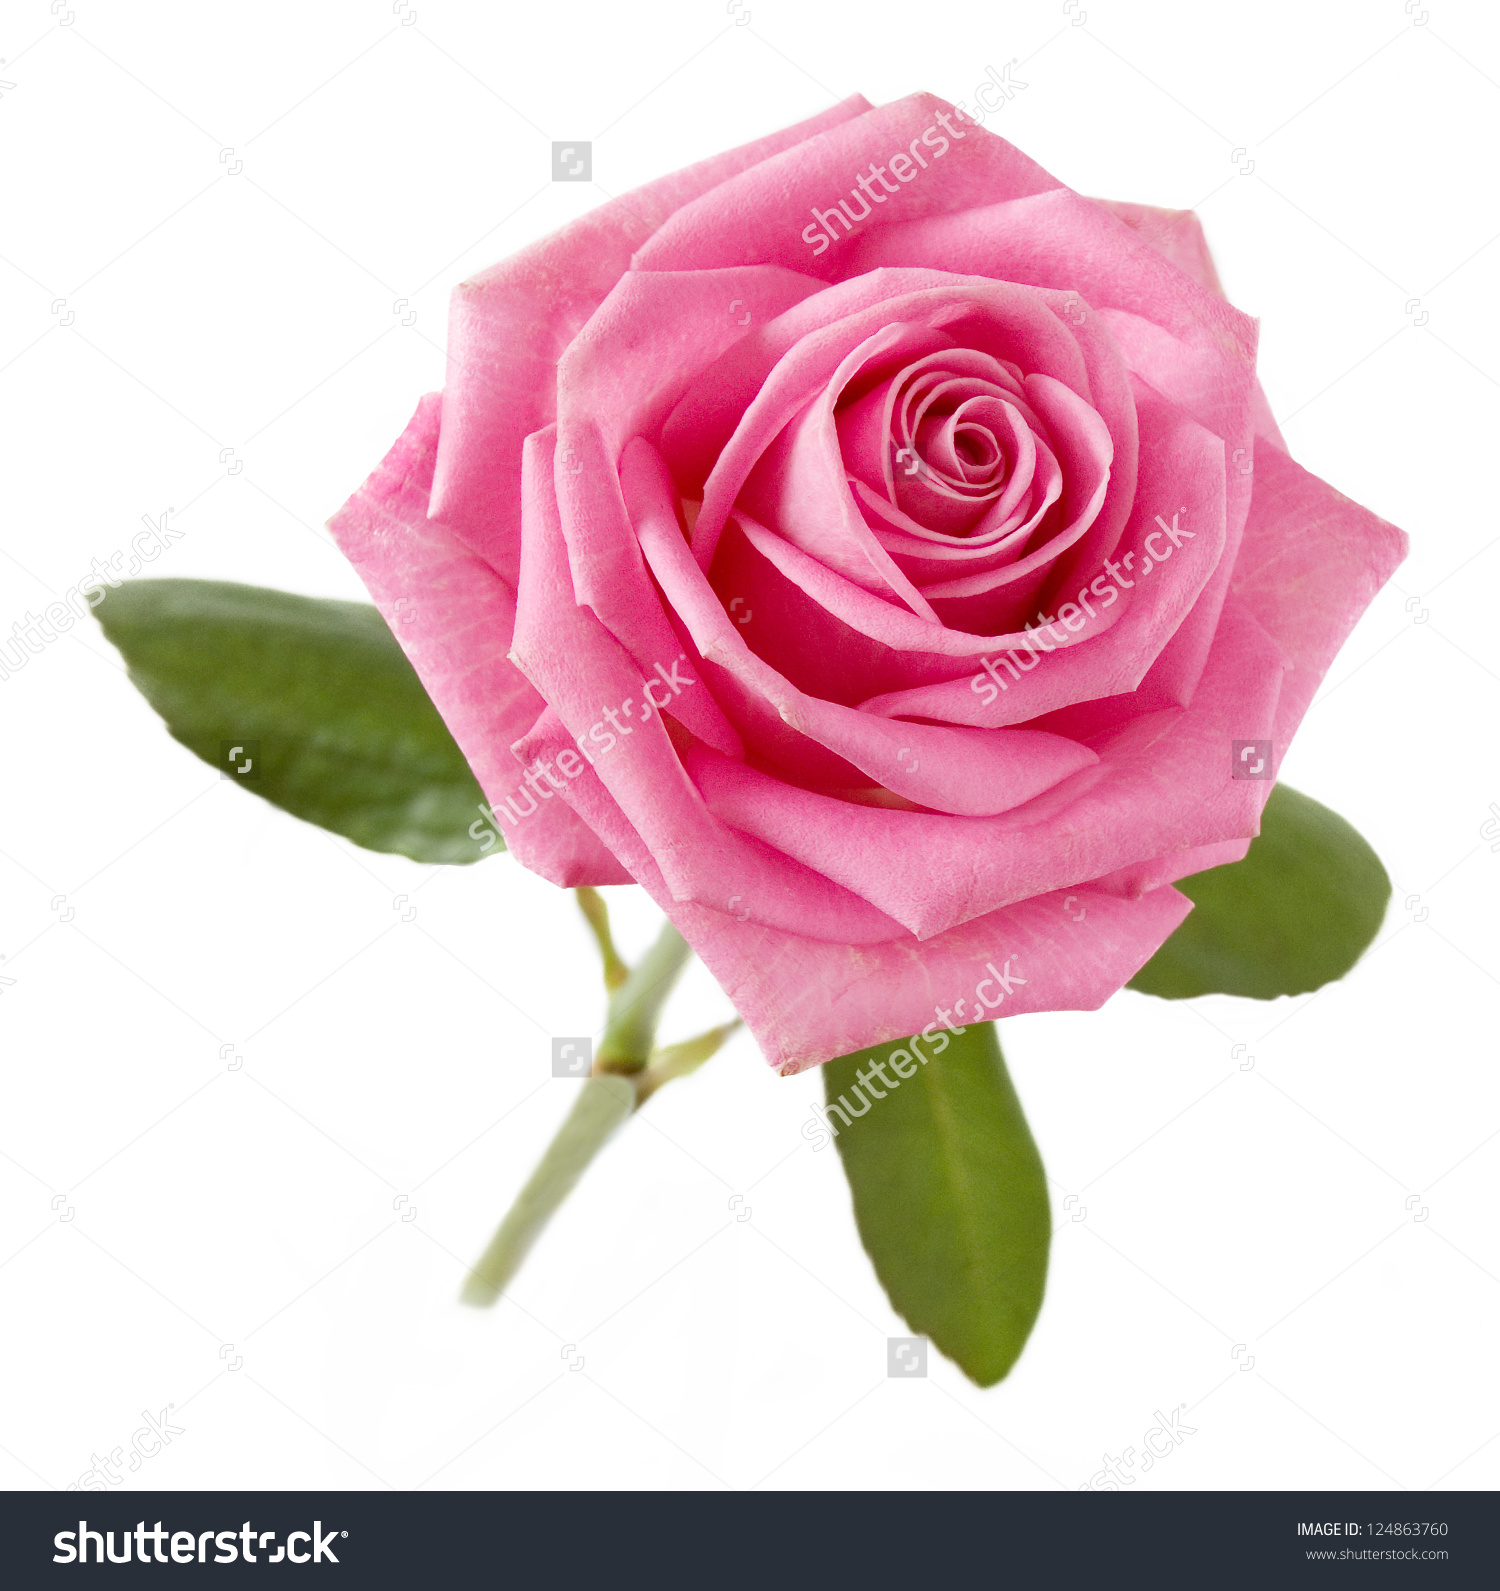 Free Pink Rose Picture 11098 - HDWPro